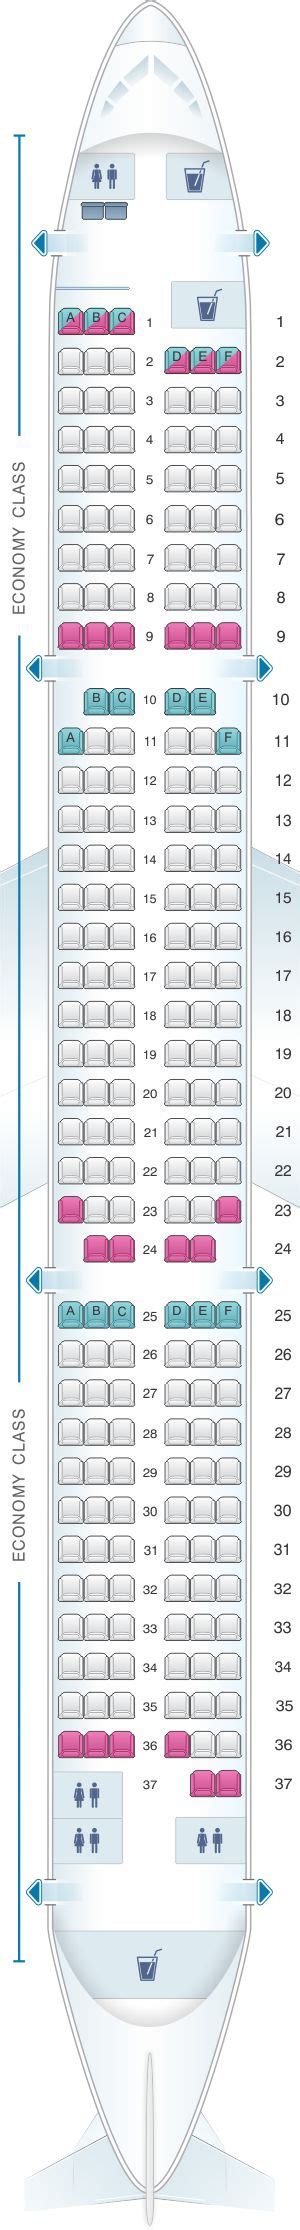 Seat Map Novair Airbus A321 200 China Southern Airlines American